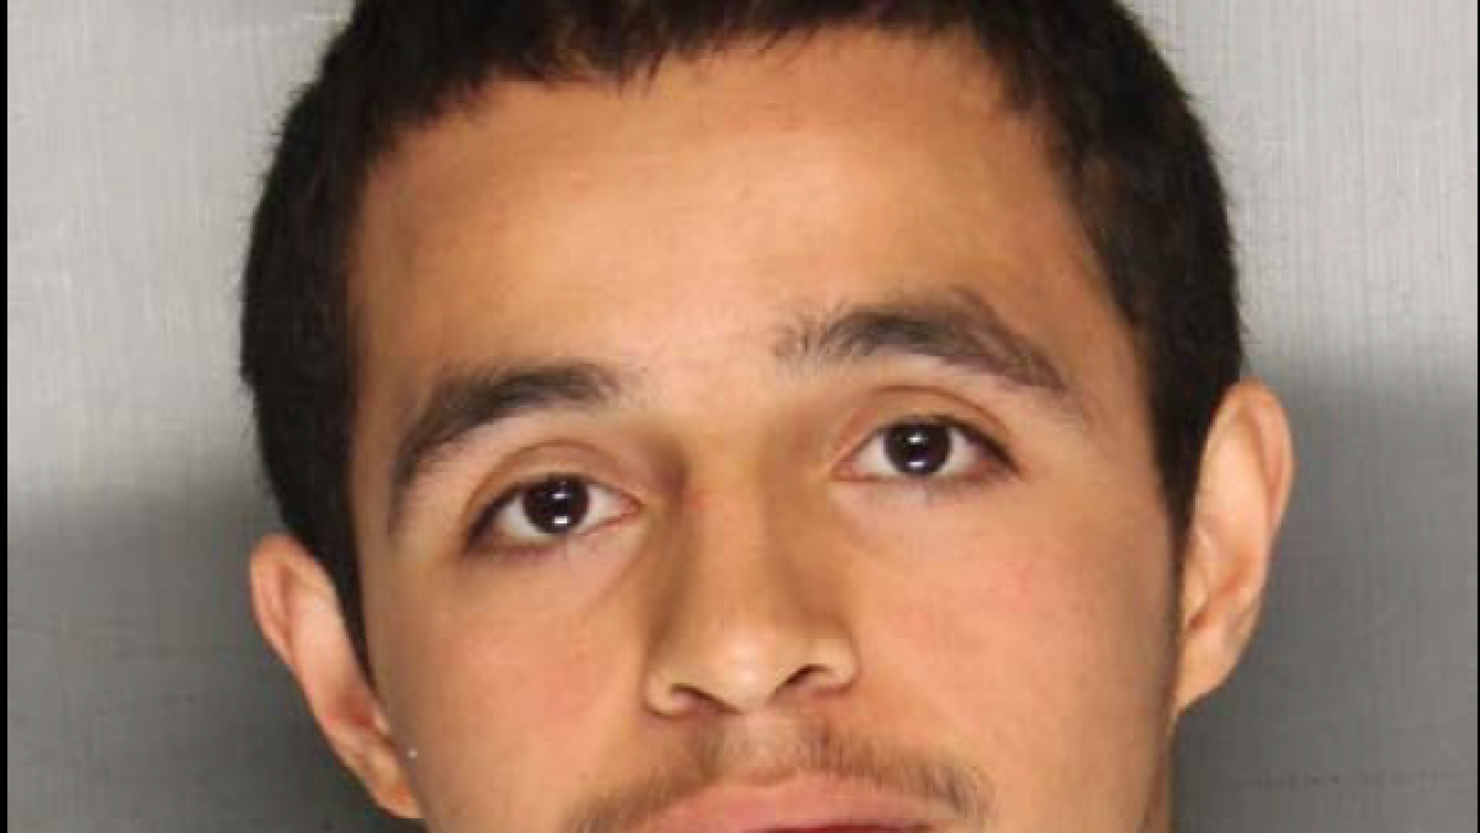 Alfonso Martinez, 20, faces attempted homicide and other charges at a court appearance Thursday afternoon.